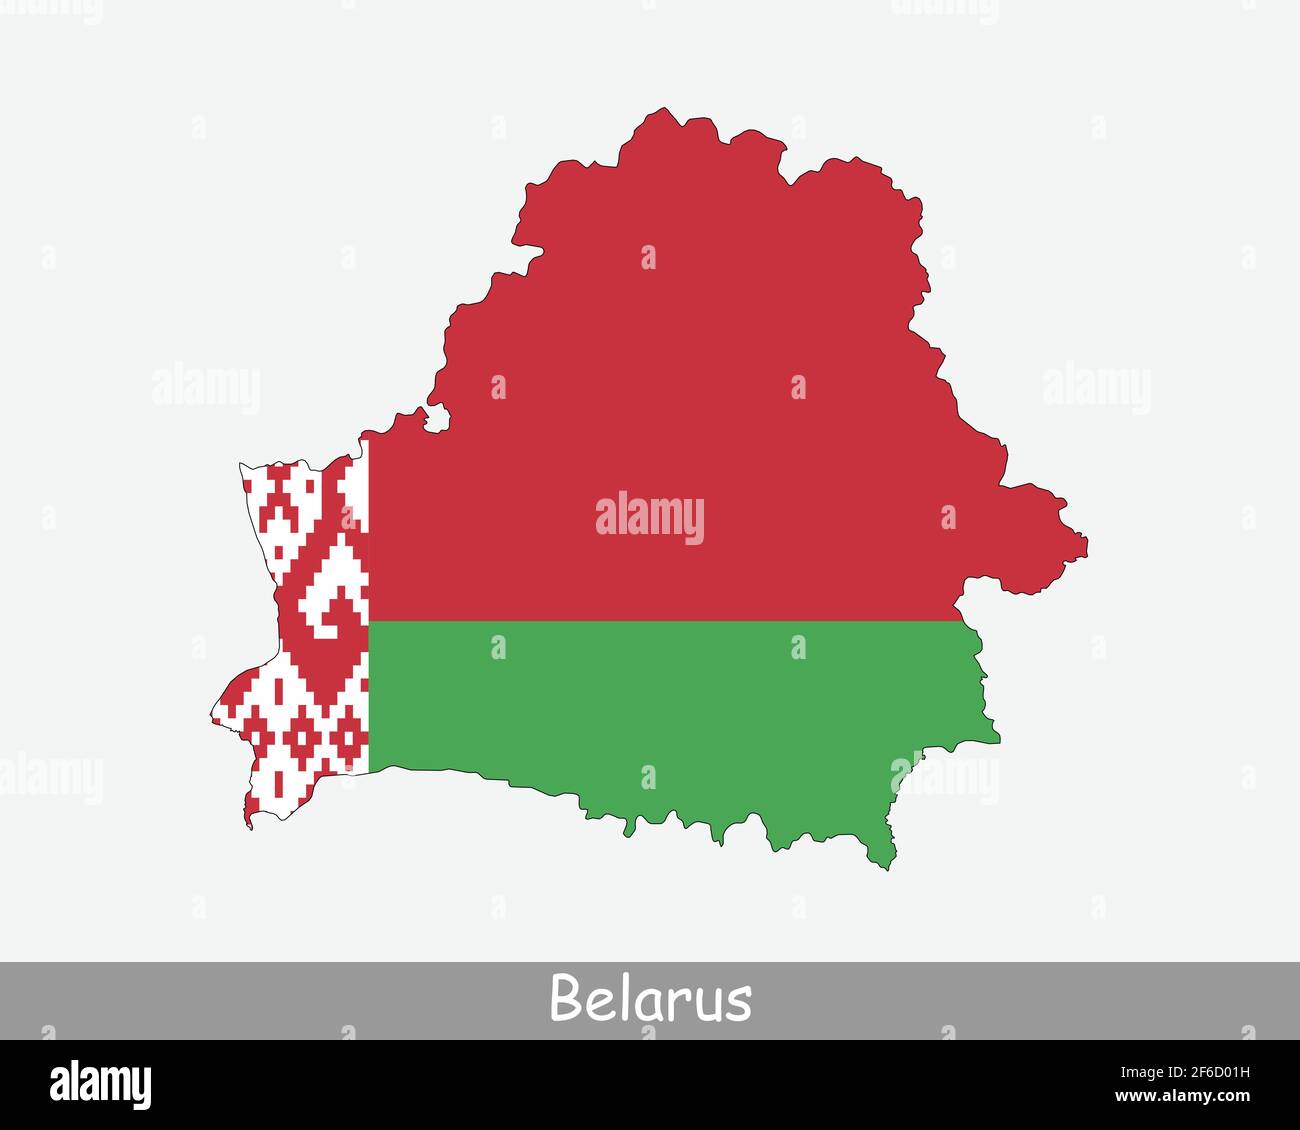 Belarus Map Flag. Map of Belarus with the national flag isolated on white background. Vector illustration. Stock Vector